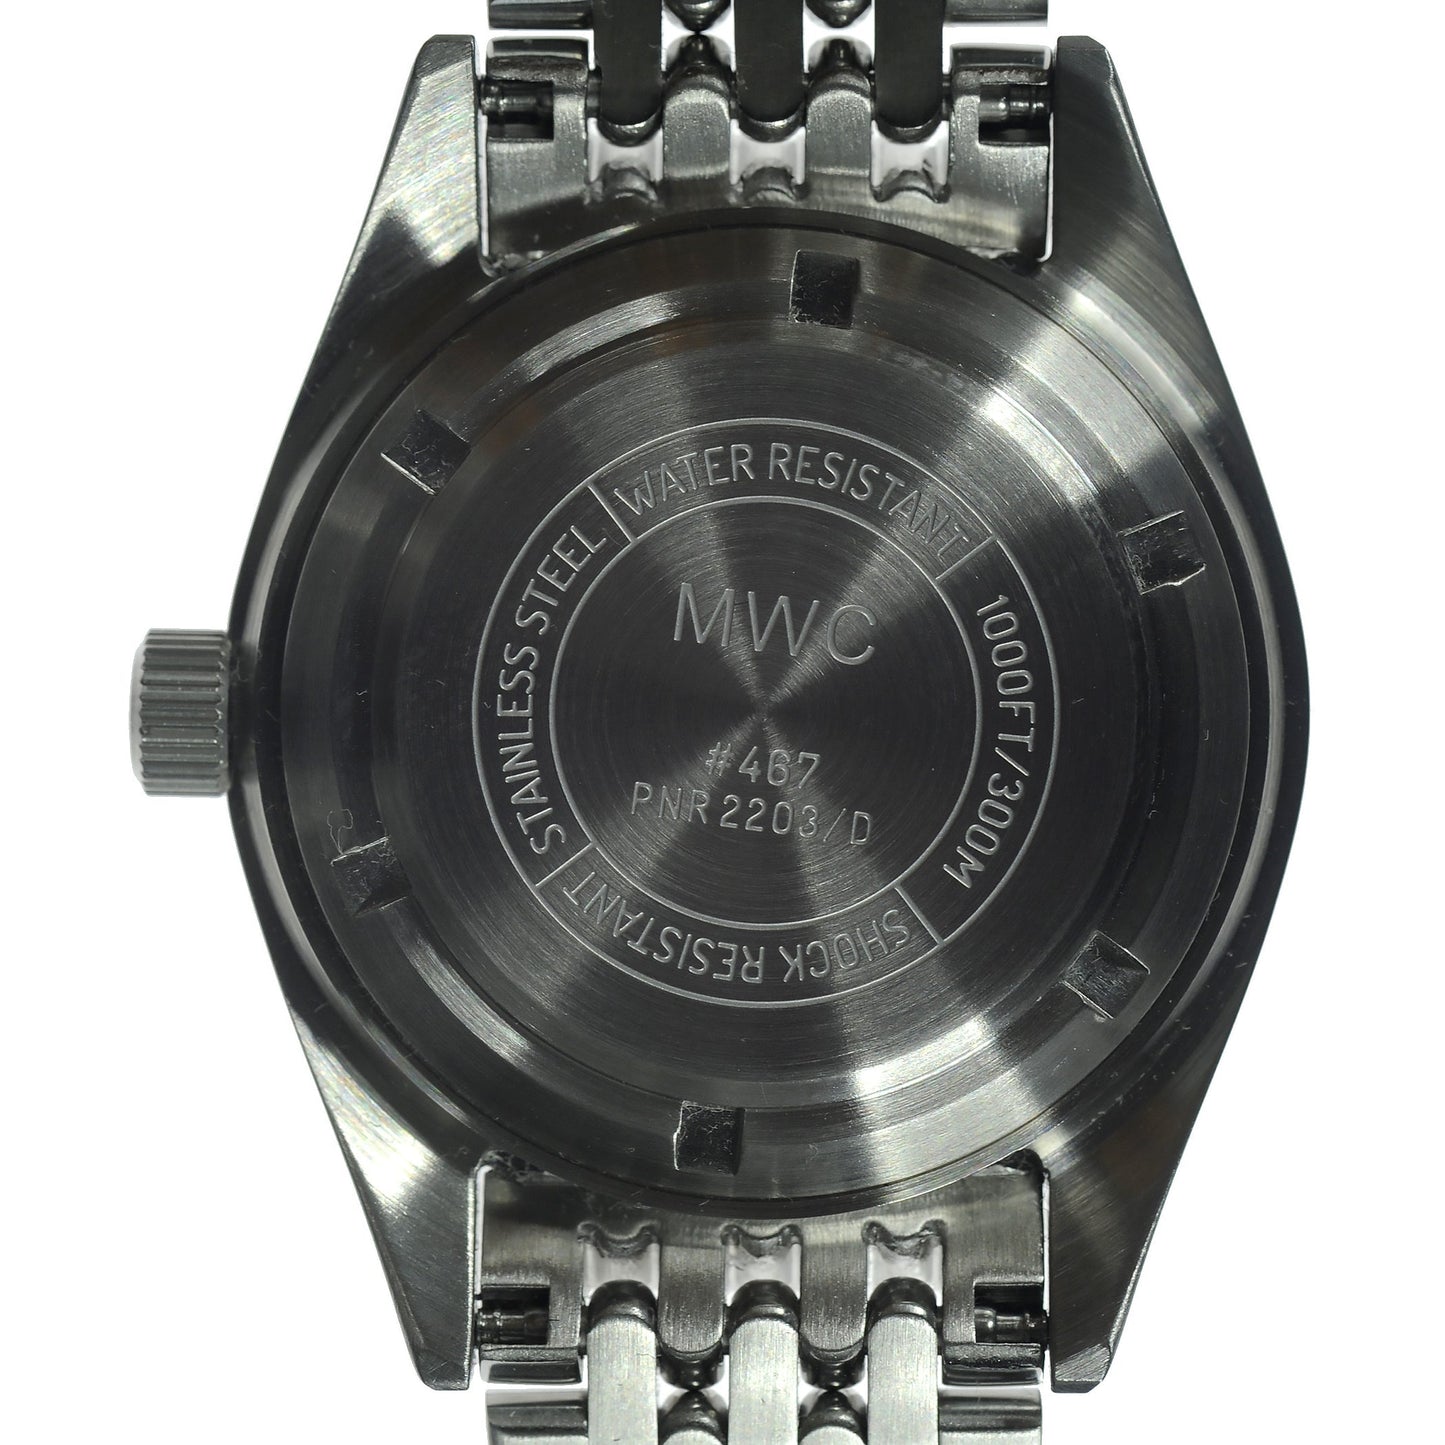 MWC Classic 1960s Pattern Dual Time Zone Automatic Divers Watch with Sapphire Crystal on Matching Bracelet